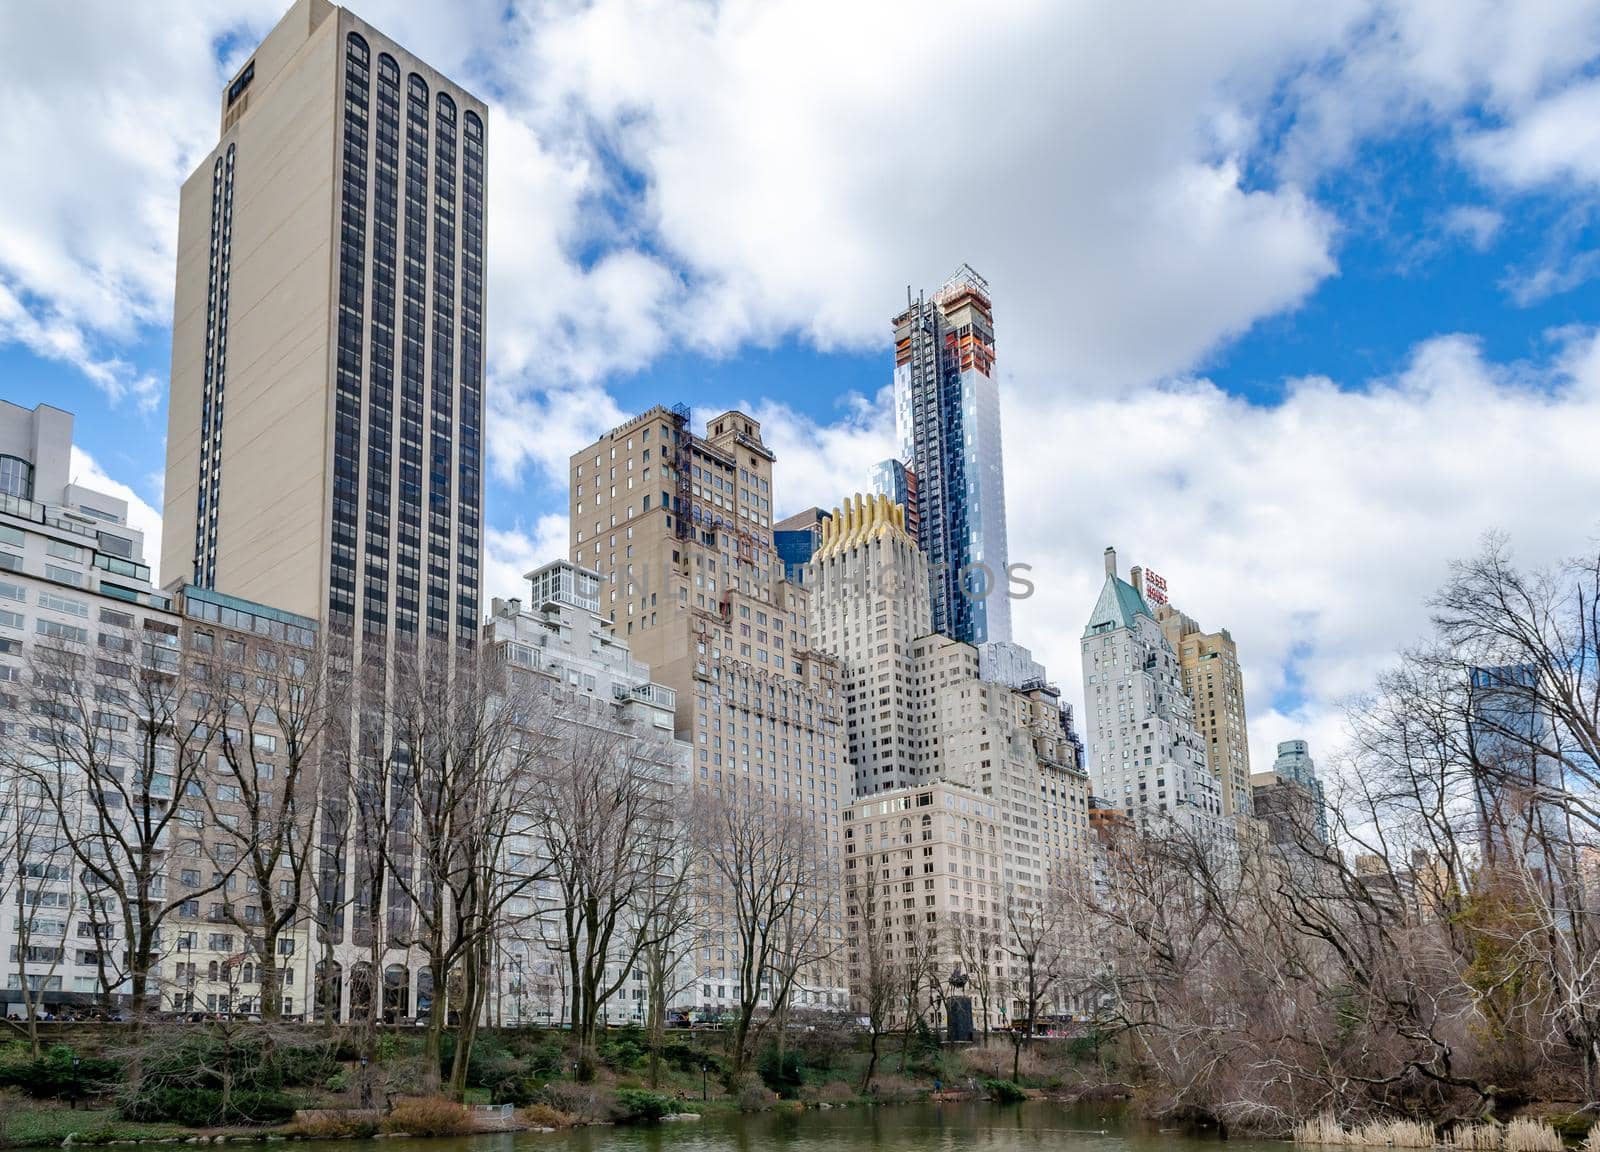 Skyline of Manhattan with Essex House Skyscraper, The Pond at Central Park Lake in forefront by bildgigant